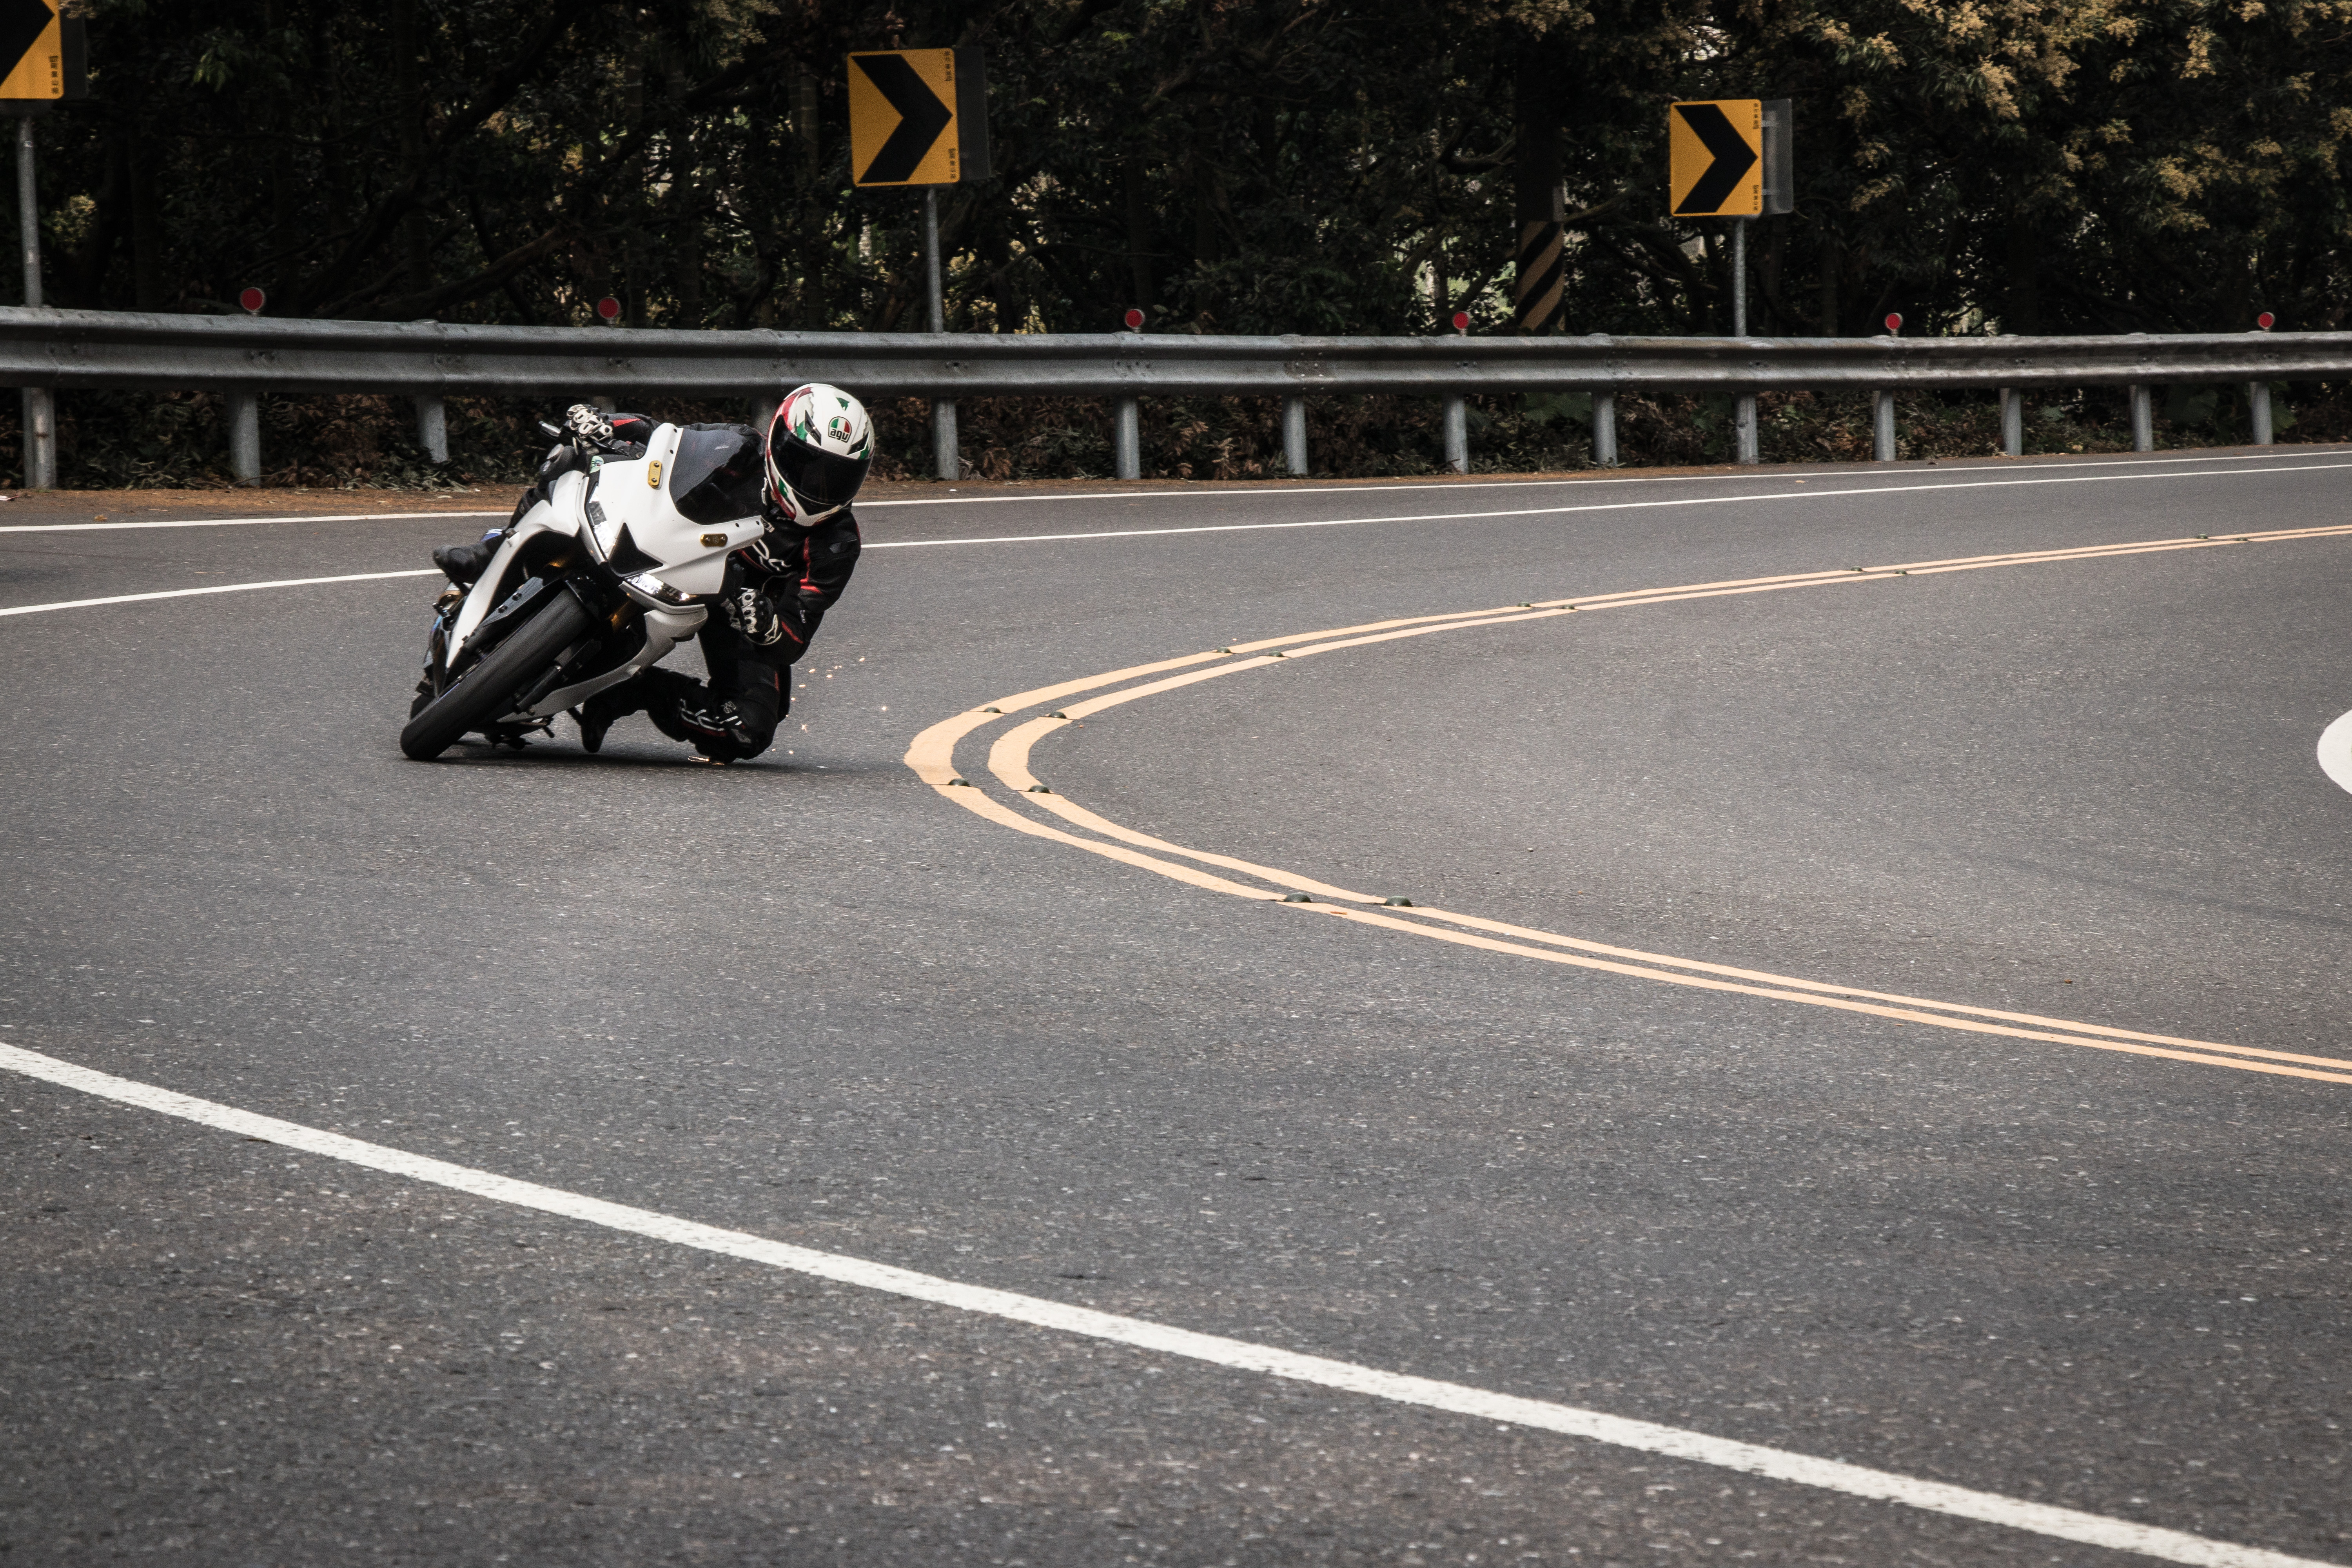 motorcycles, motorcycle, motorcyclist, speed, track, route